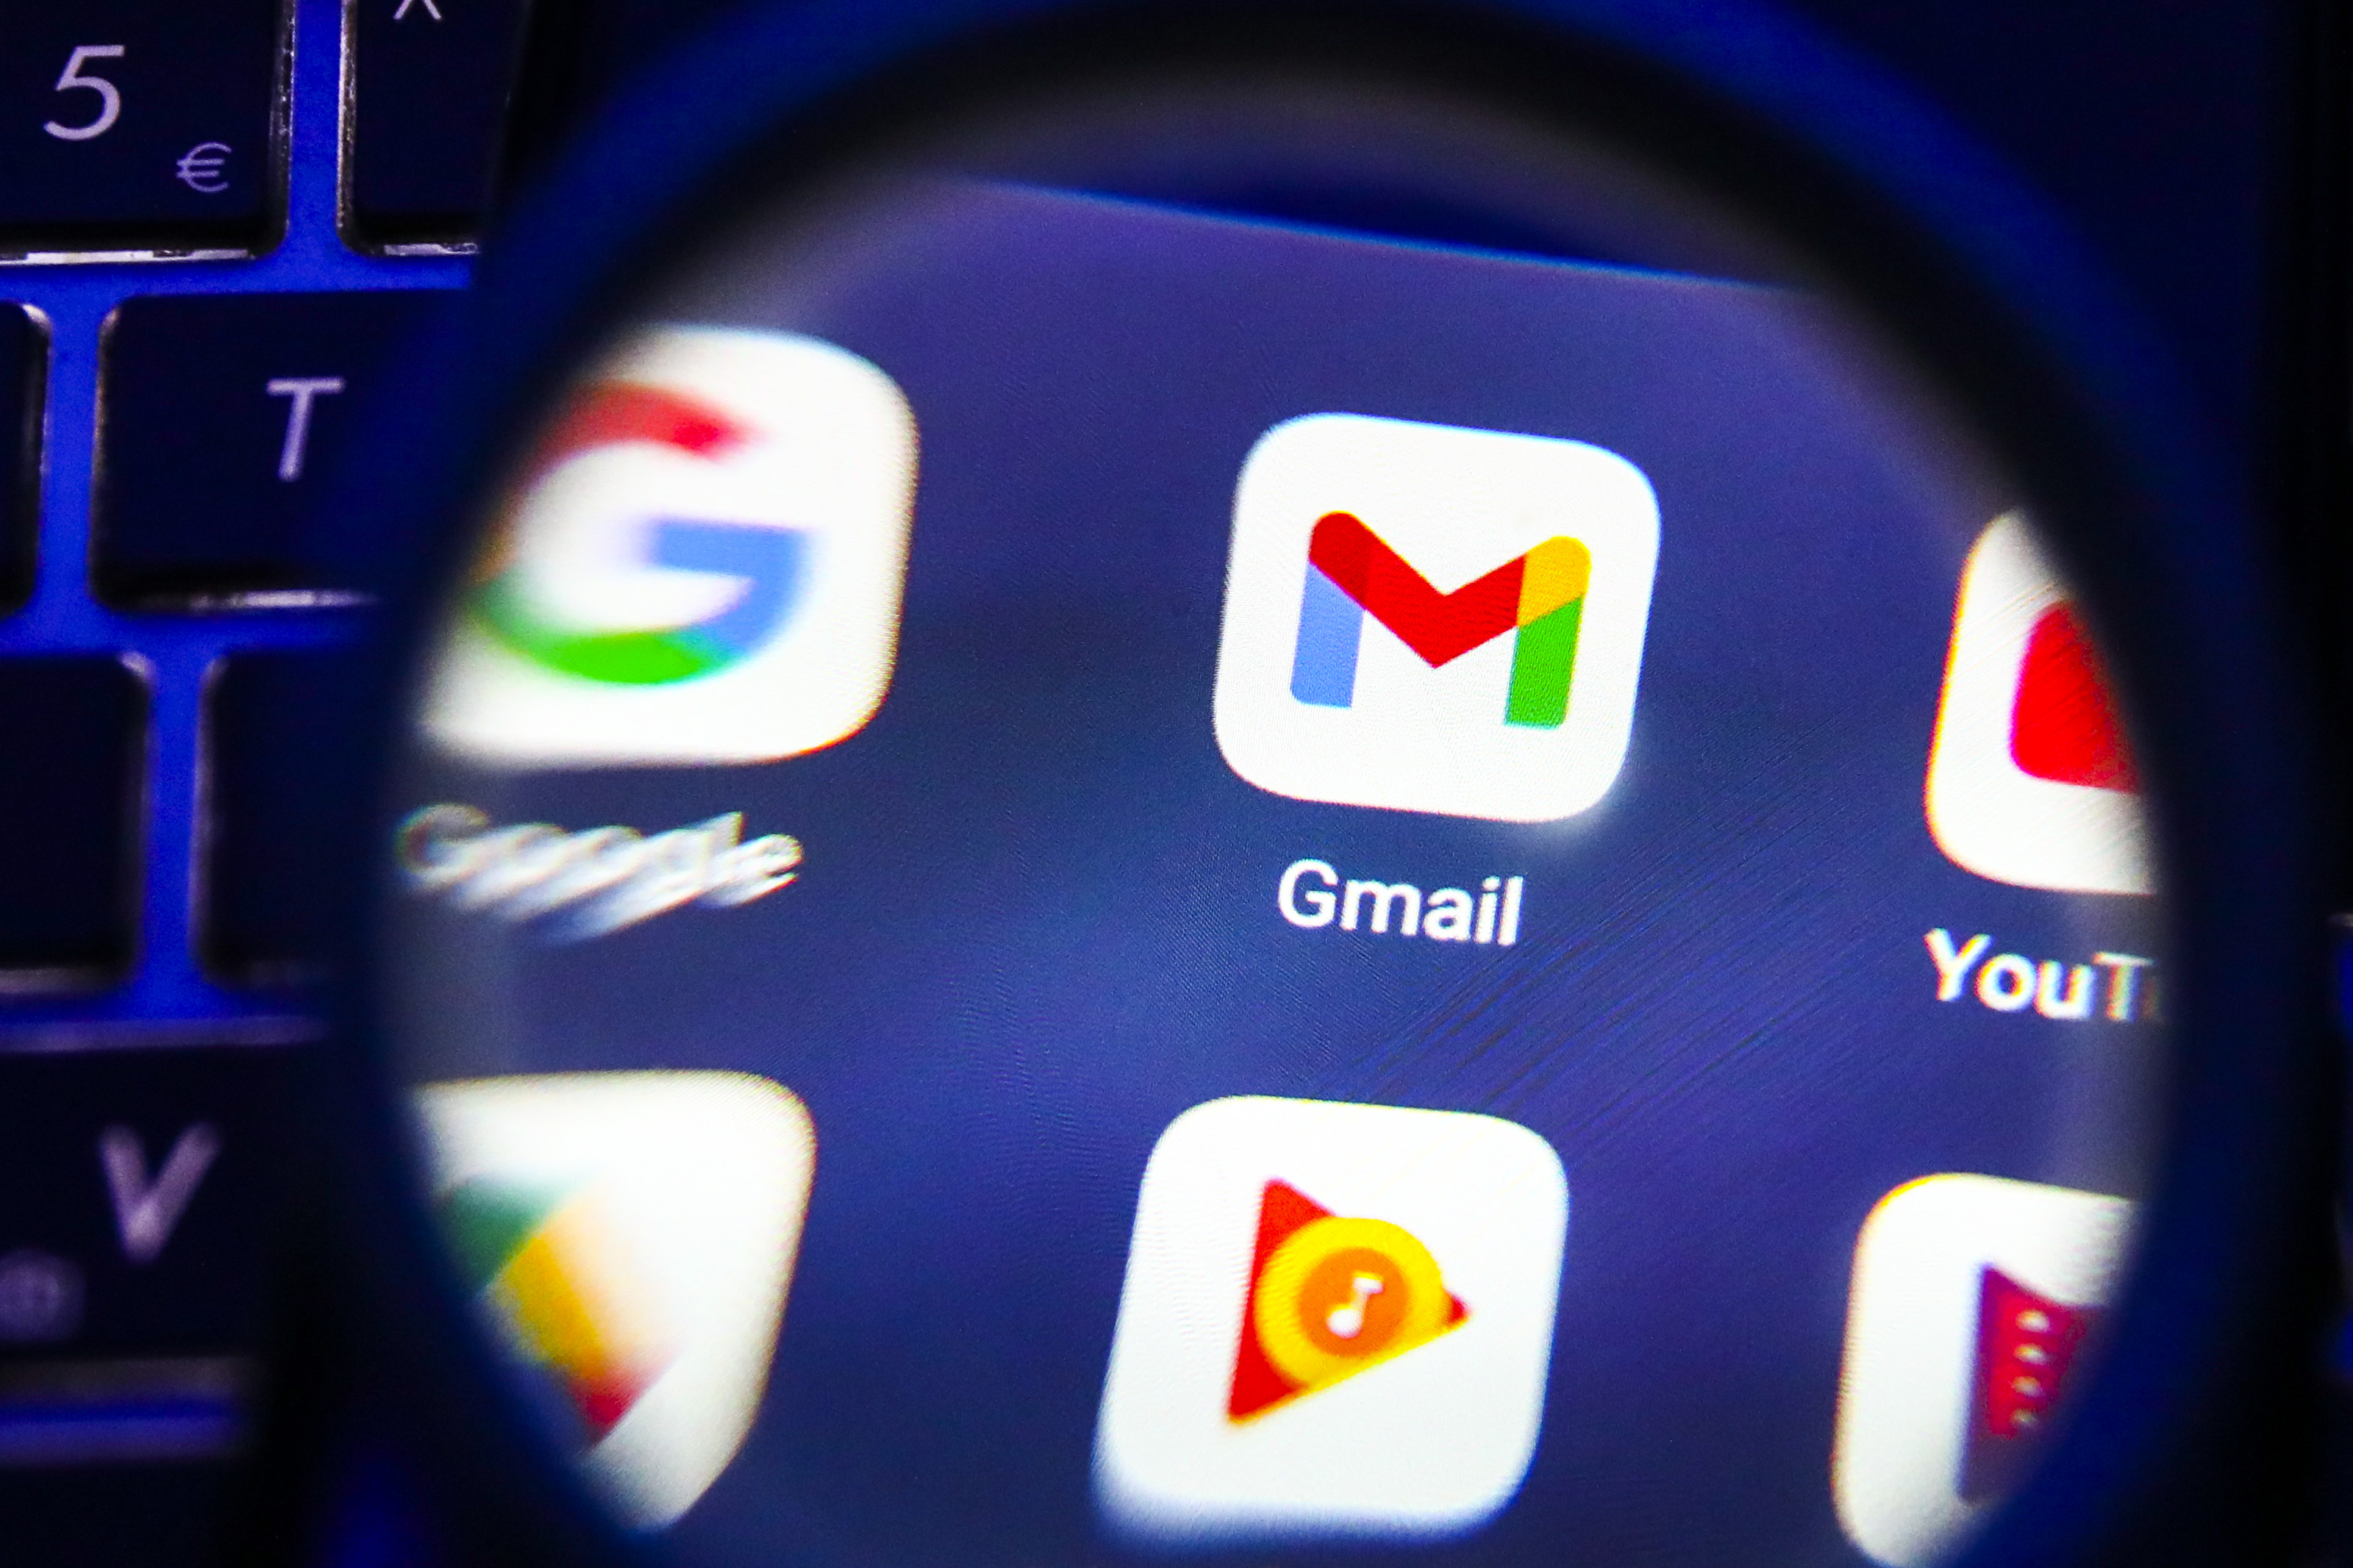 On Android, the next Gmail interface looks like a chat